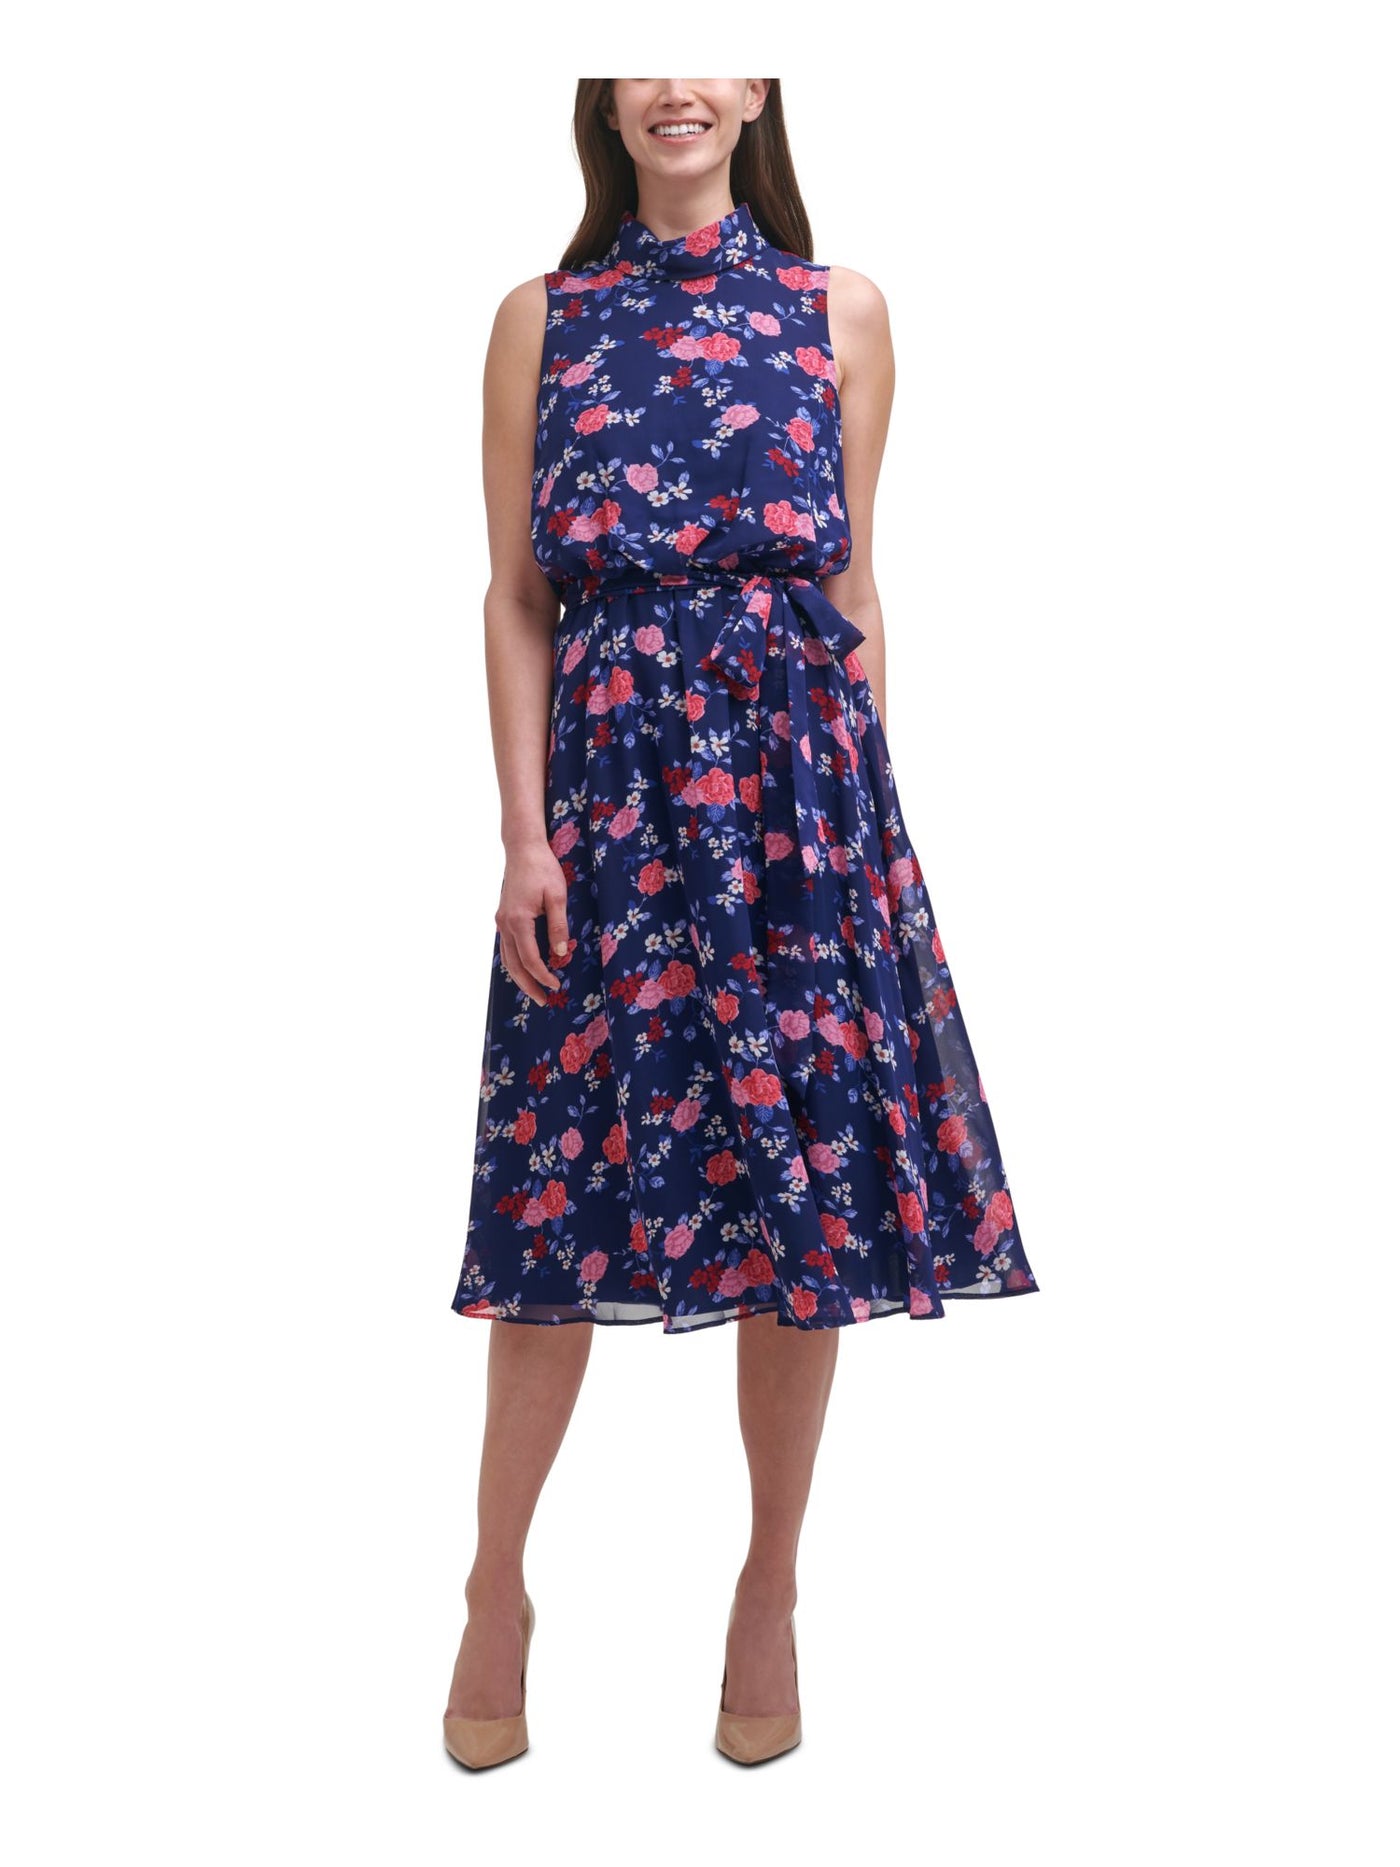 HARPER ROSE Womens Navy Zippered Belted Mock Roll-neck Chiffon Floral Sleeveless Midi Wear To Work Fit + Flare Dress 12